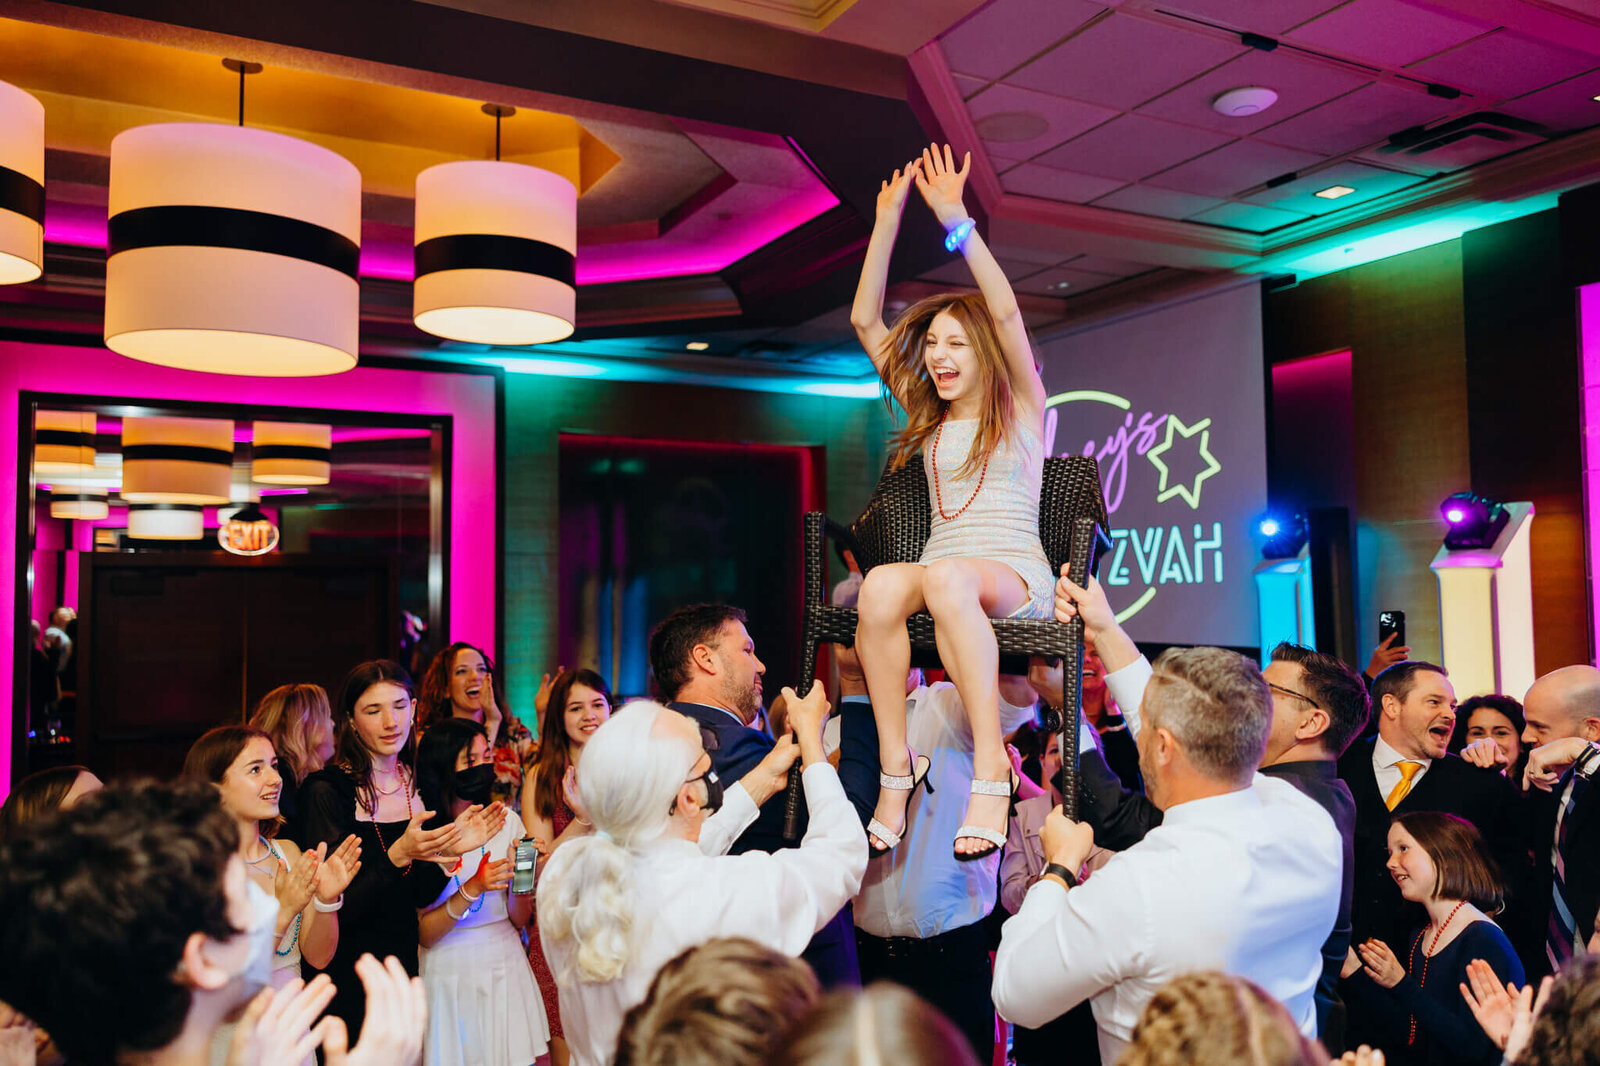 A happy teen girl in a silver dress laughs while being lifted in a chair on the crowded dance floor in some Bellevue Bar and Bat Mitzvah Photography